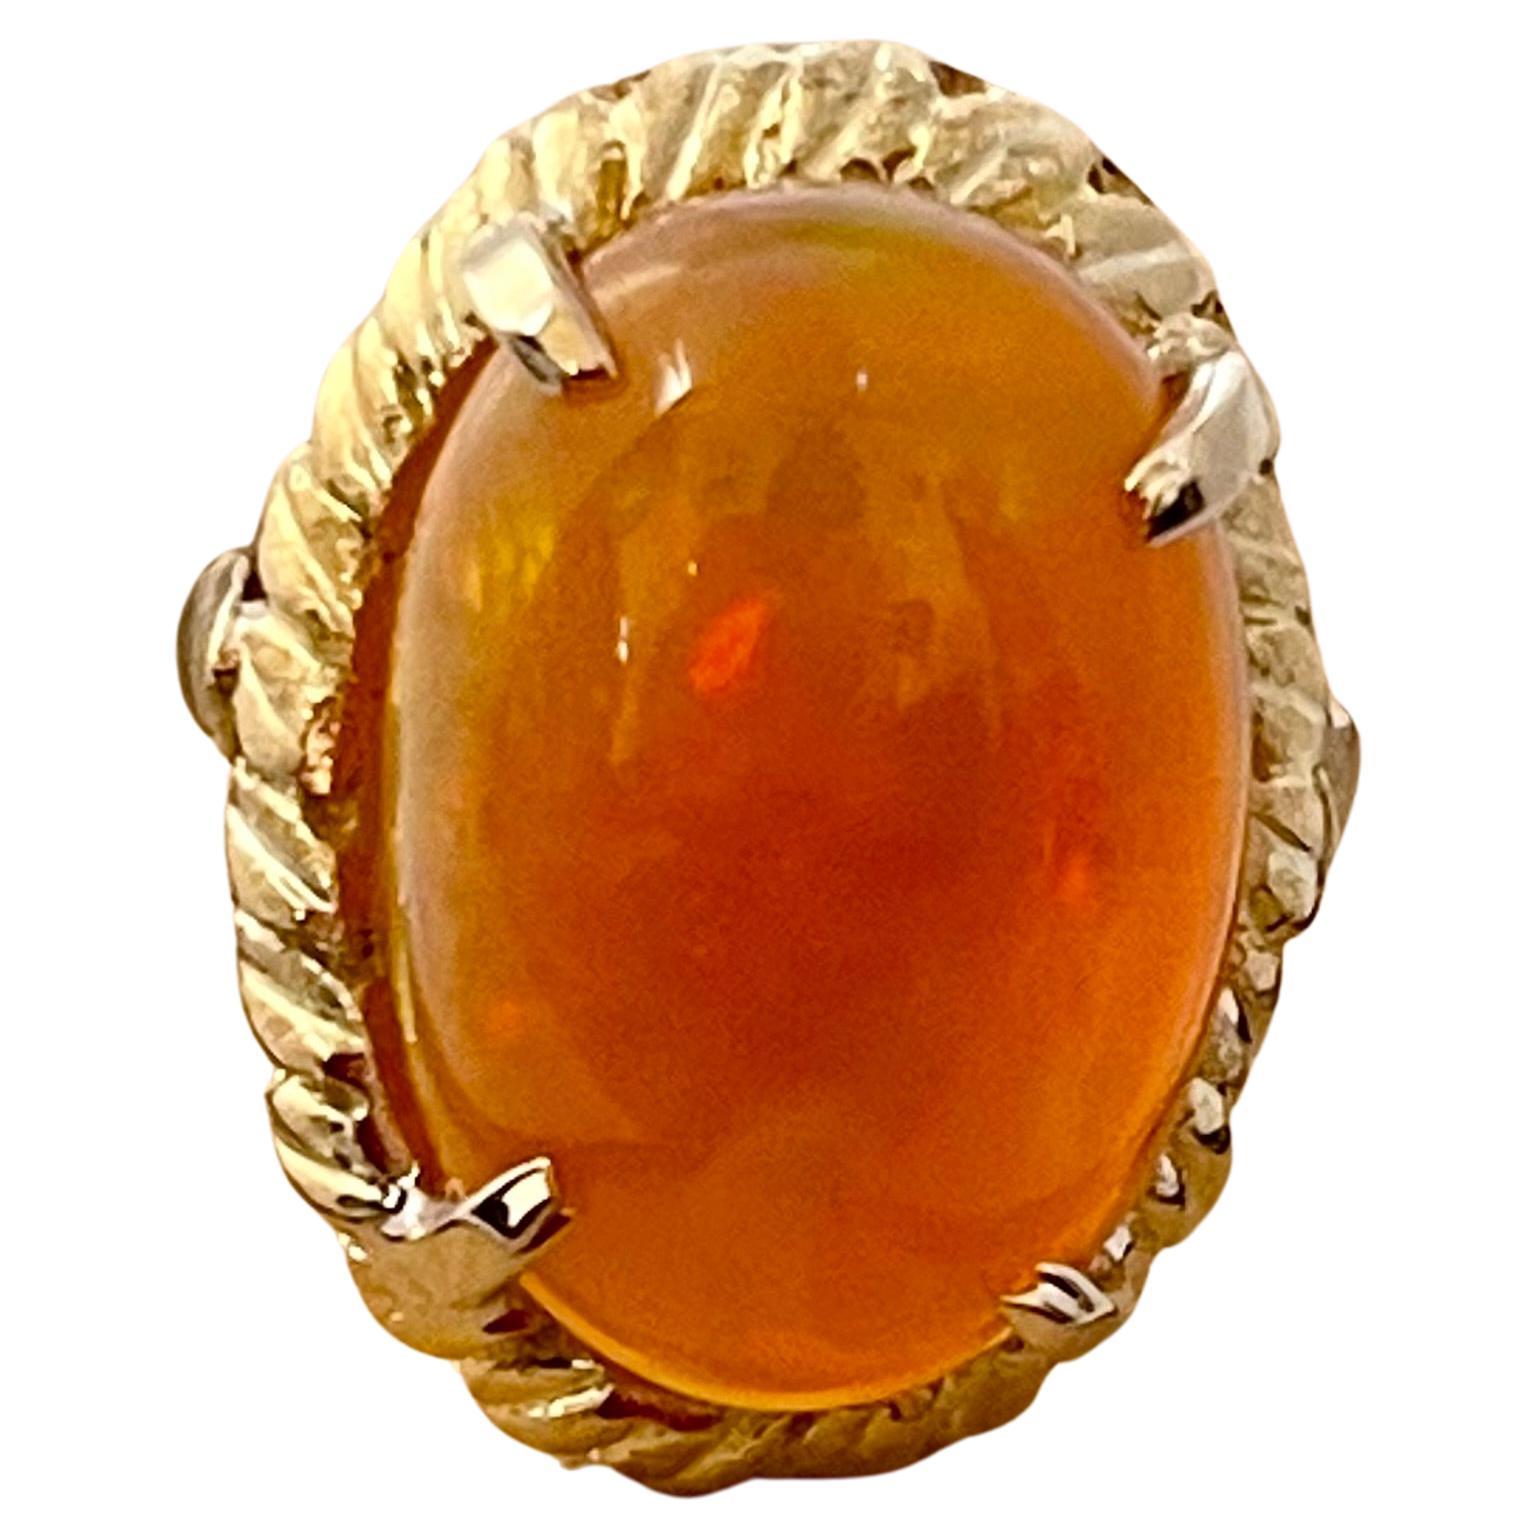 A Huge Cocktail ring 
Approximately 14 Carat Oval Ethiopian Opal  & Diamond Ring 14 Karat Yellow Gold Size 6.5
This spectacular Ring consisting of a single Oval Shape Ethiopian Opal Approximately 14 Carat. 

very clean Stone no inclusion , full of